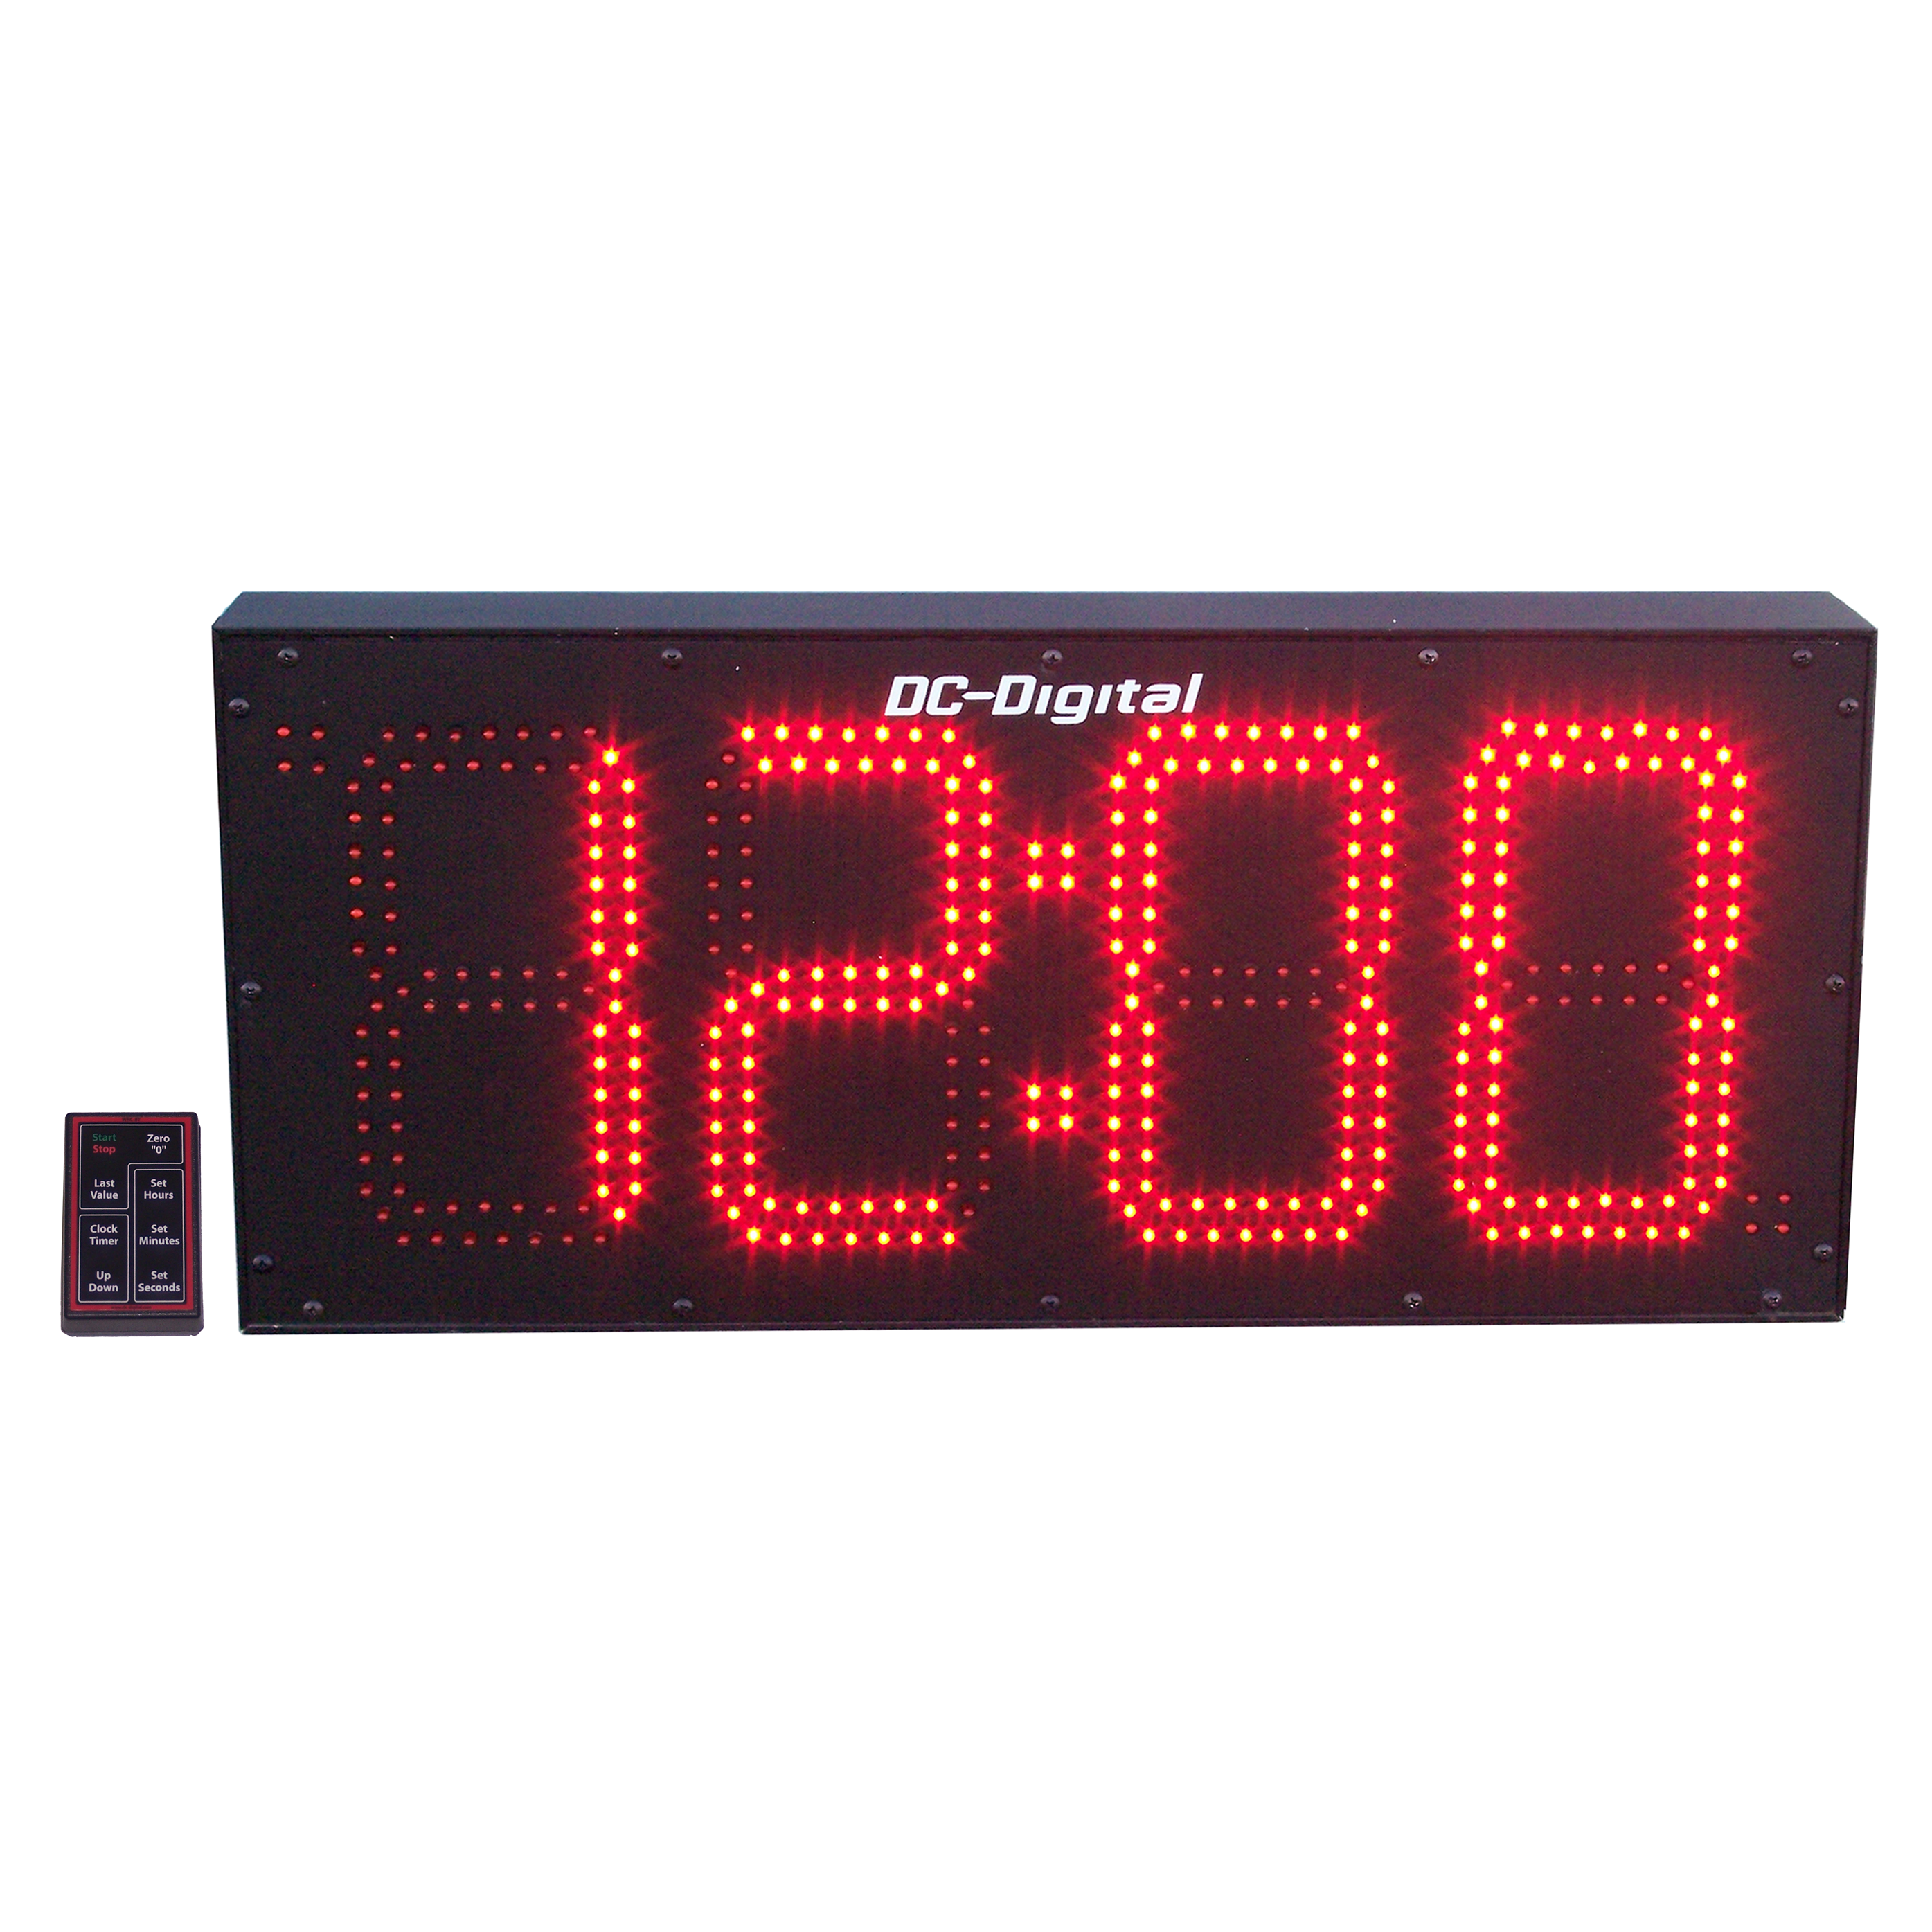 (DC-80UTW) 8.0 Inch LED Digital, Wireless Handheld Controlled, Count Up timer, Countdown Timer, Time of Day Clock (OUTDOOR)